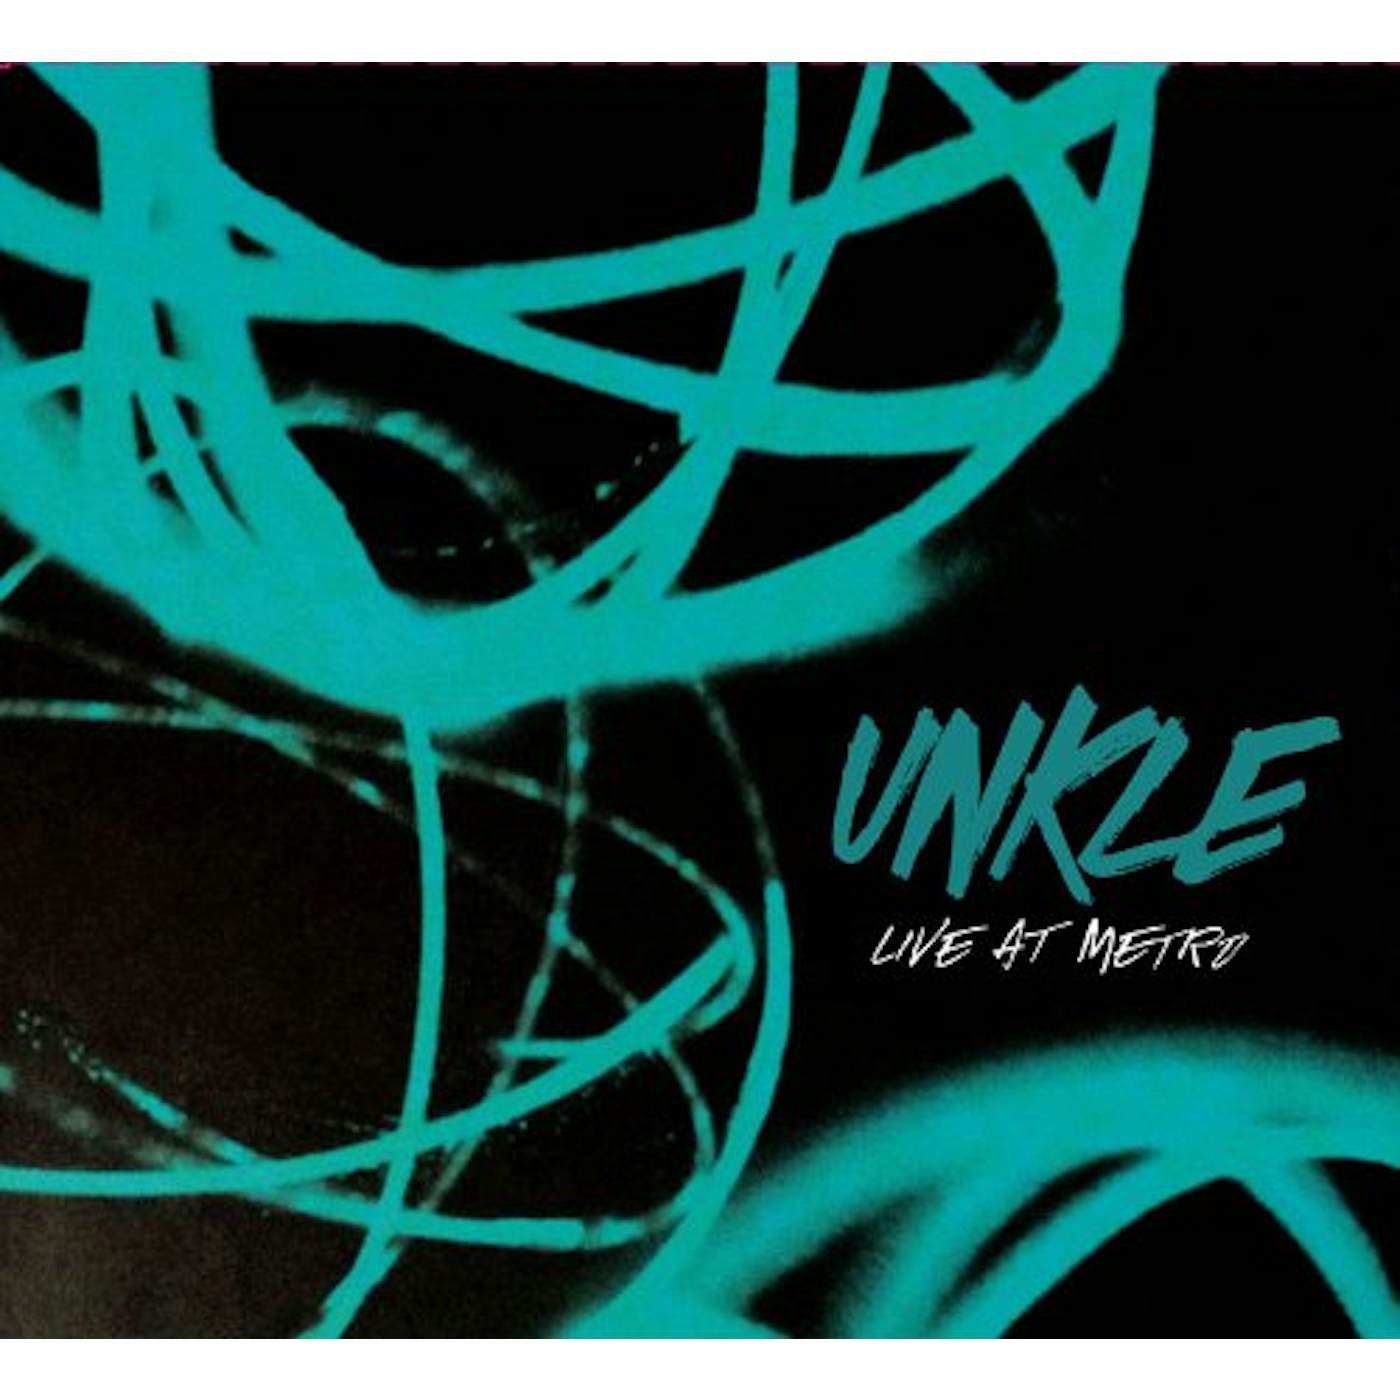 UNKLE LIVE AT METRO CD